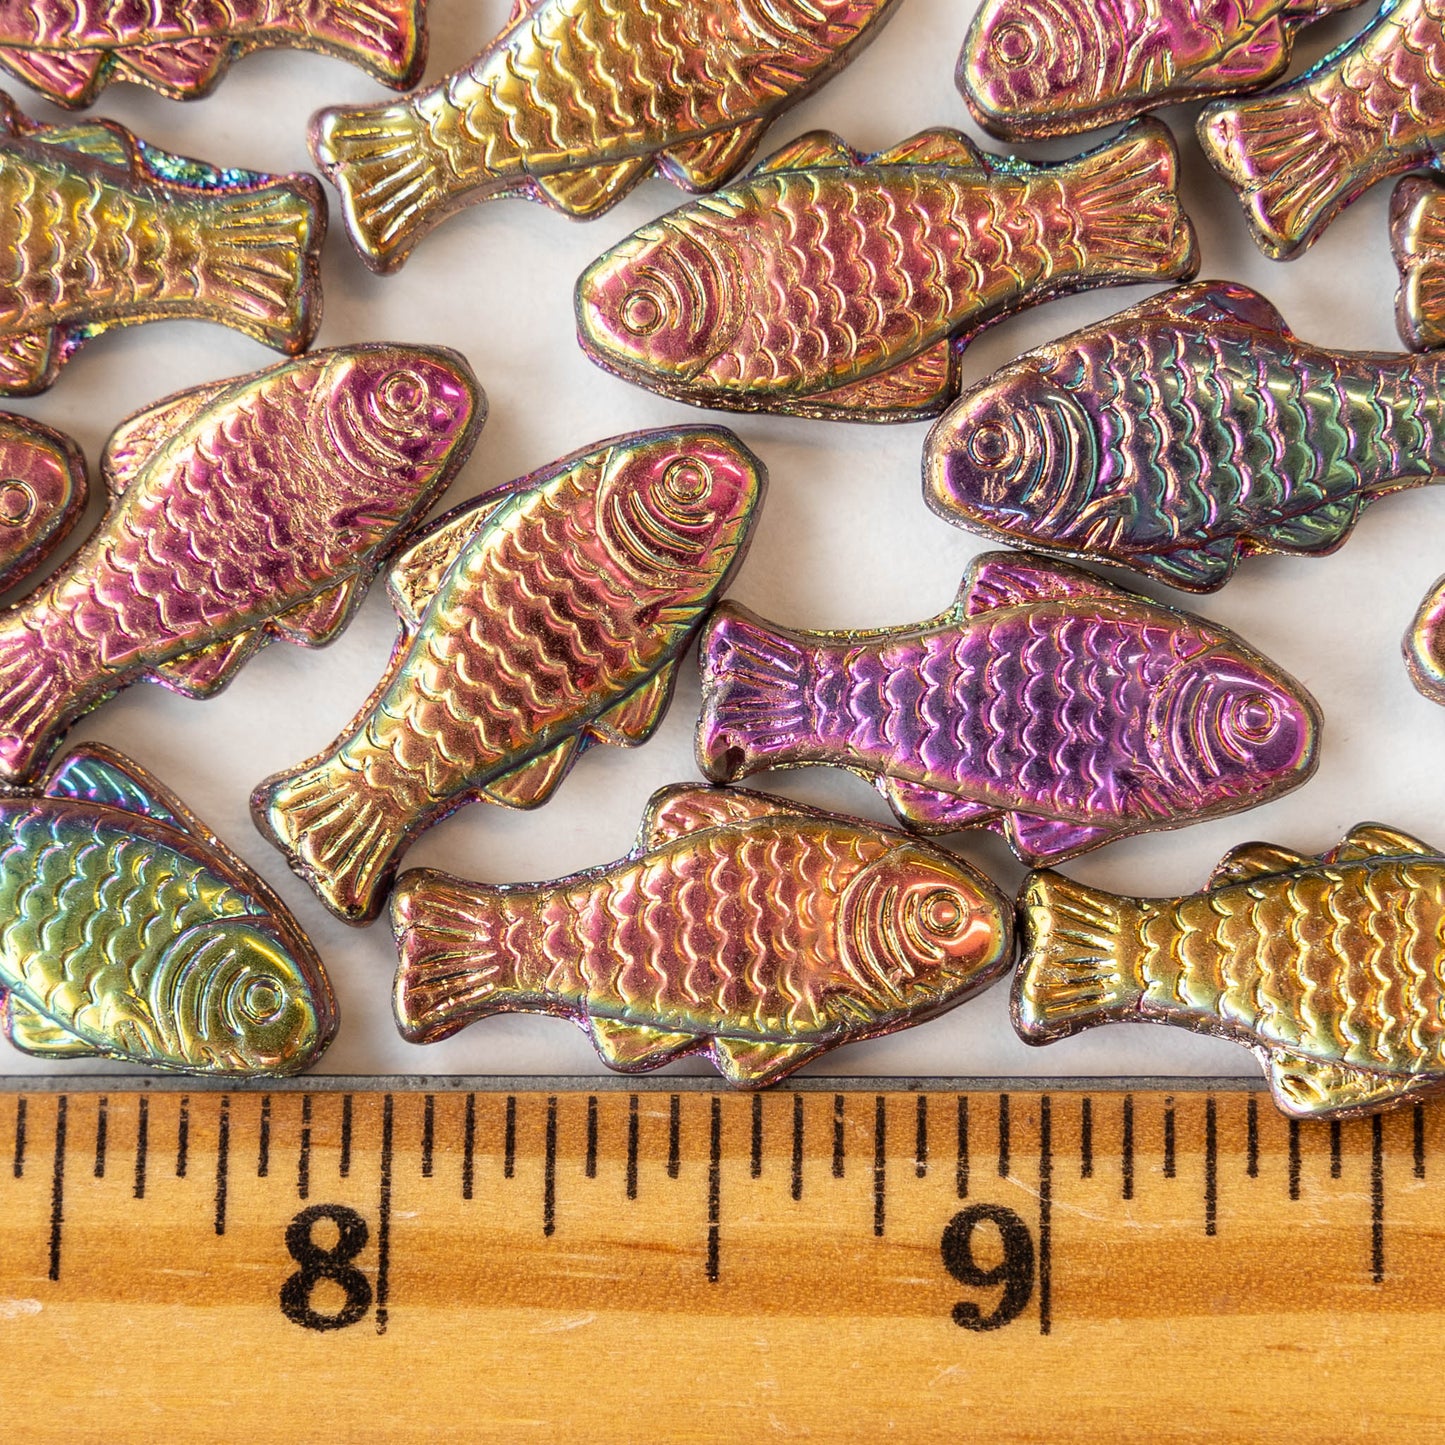 Glass Fish Beads - Colorful Iridescent Mix - 6 or 12